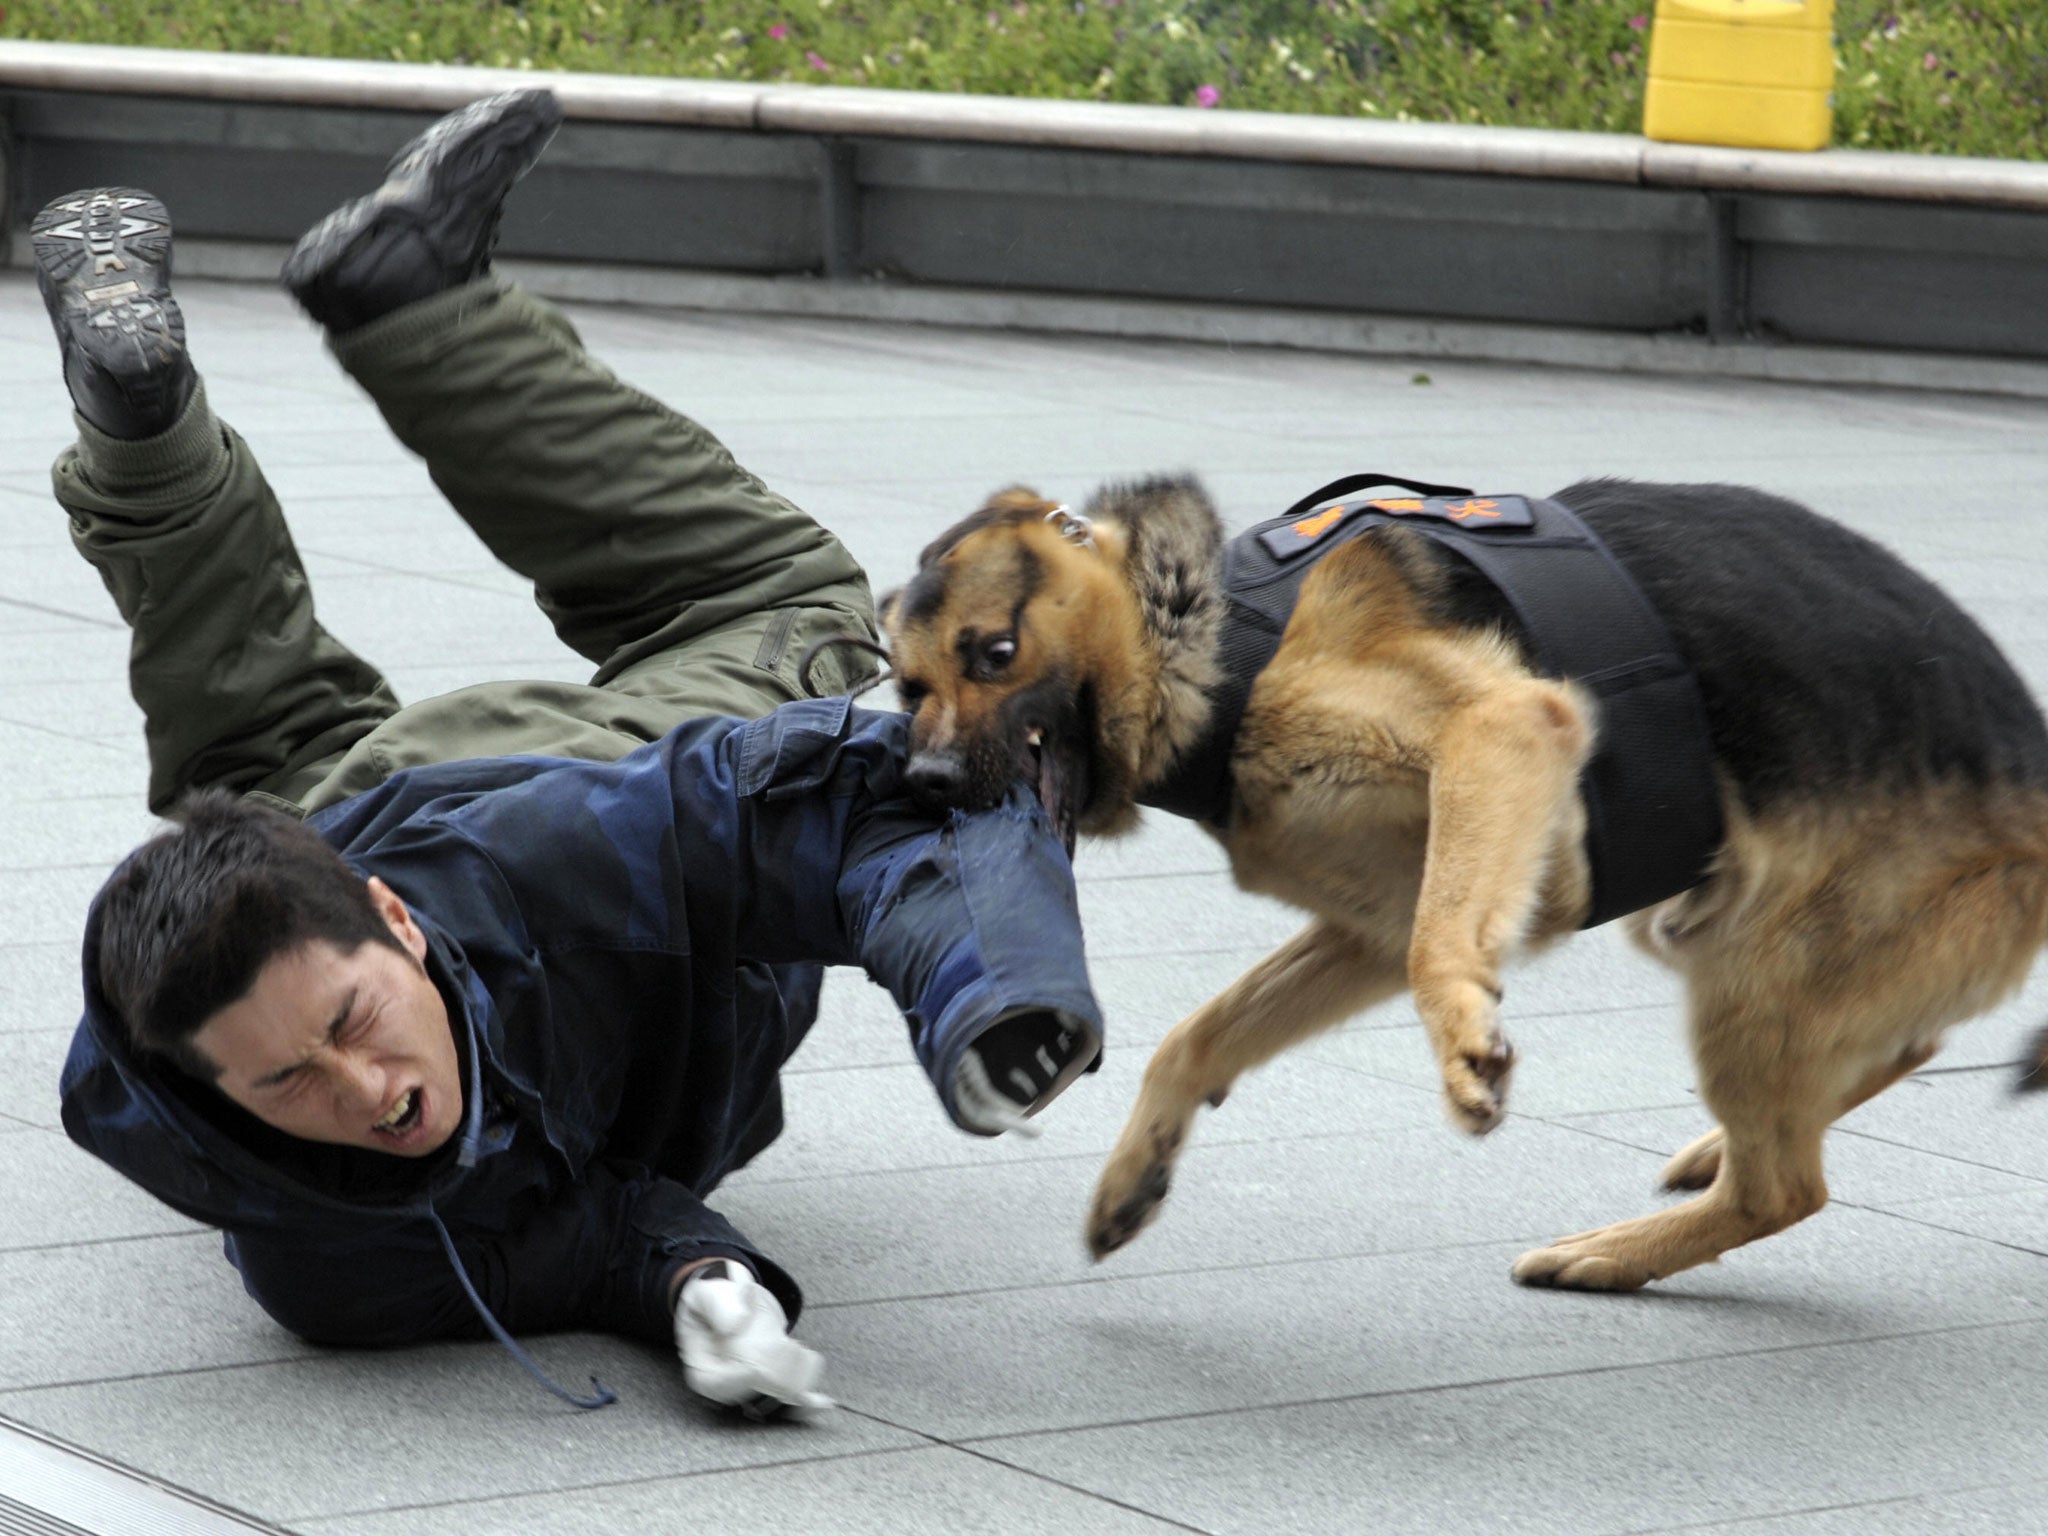 A police dog bites the arm of a 'suspect' during an anti-terrorism practice at the Tokyo shopping and business mall of Roppongi Hills on June 4, 2008